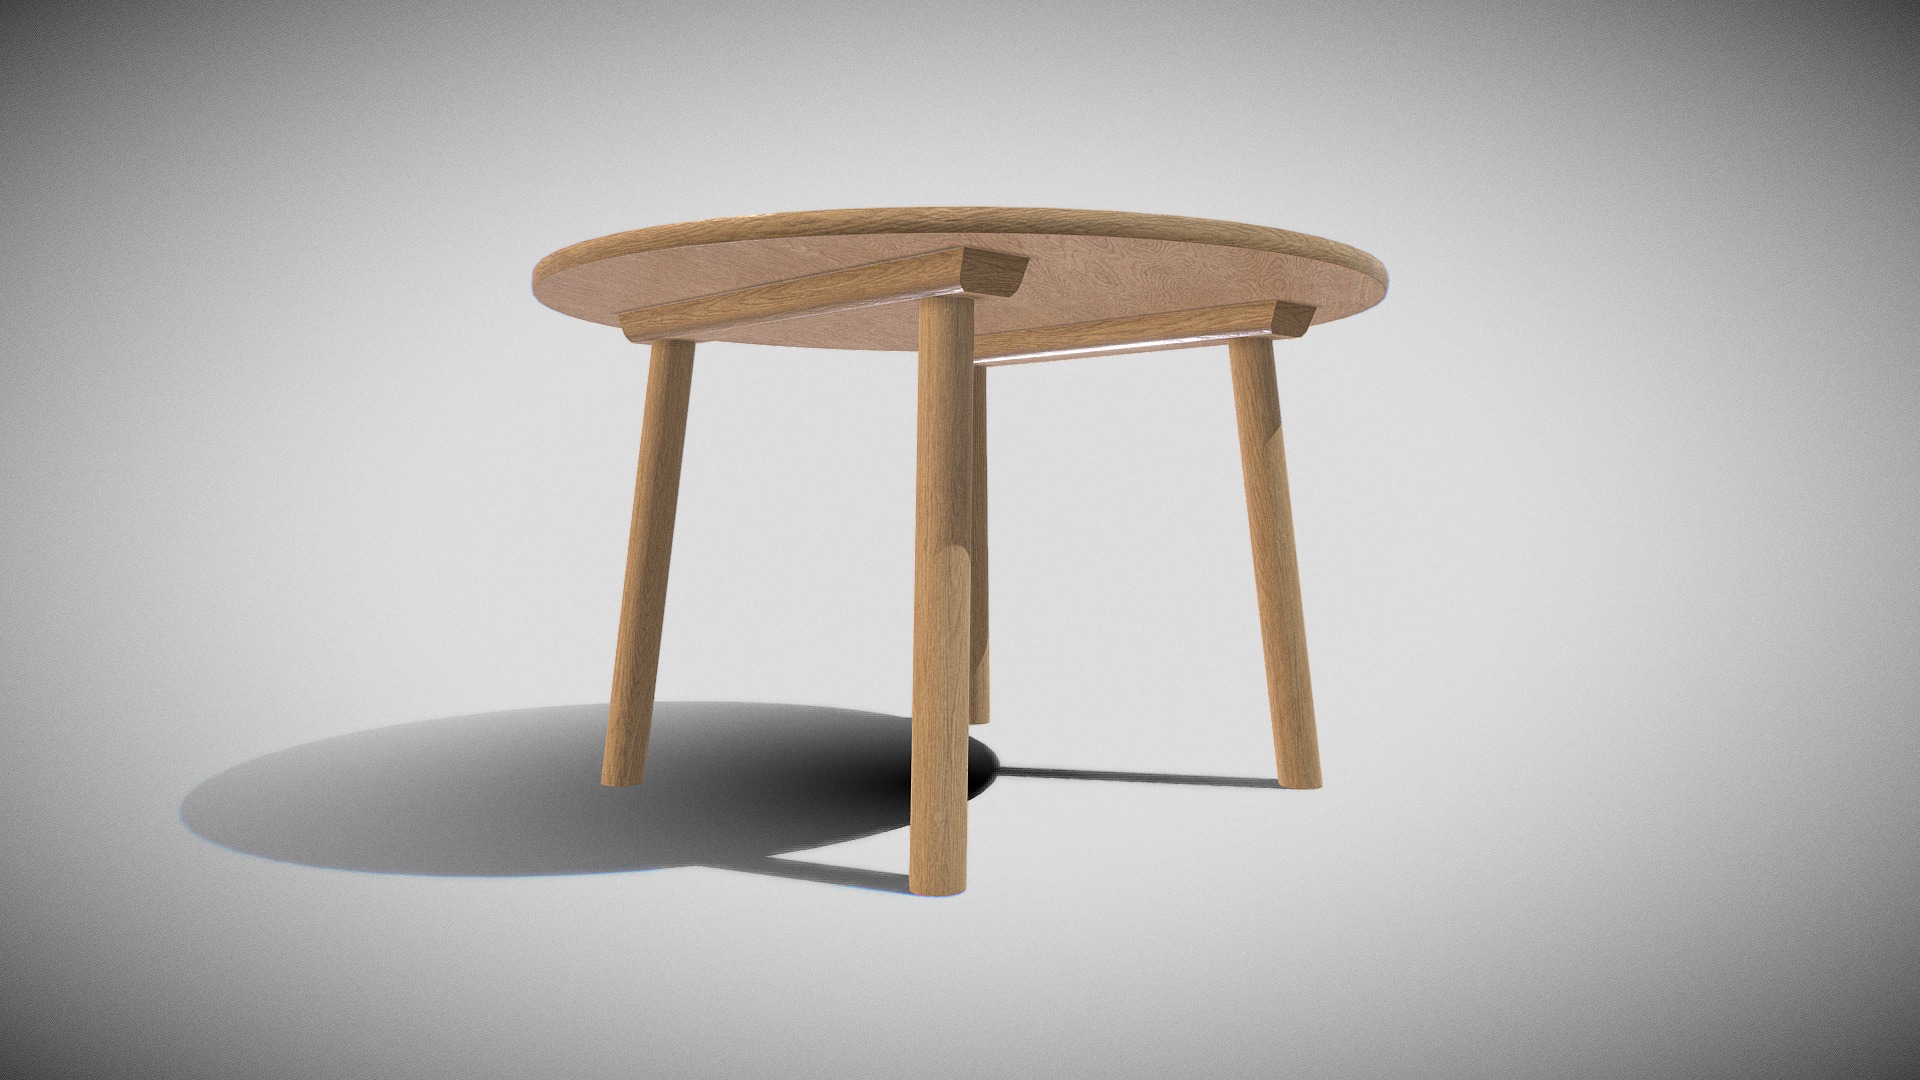 3D model TARO TABLE 6121-oak oil treated - This is a 3D model of the TARO TABLE 6121-oak oil treated. The 3D model is about a wooden chair on a white background.